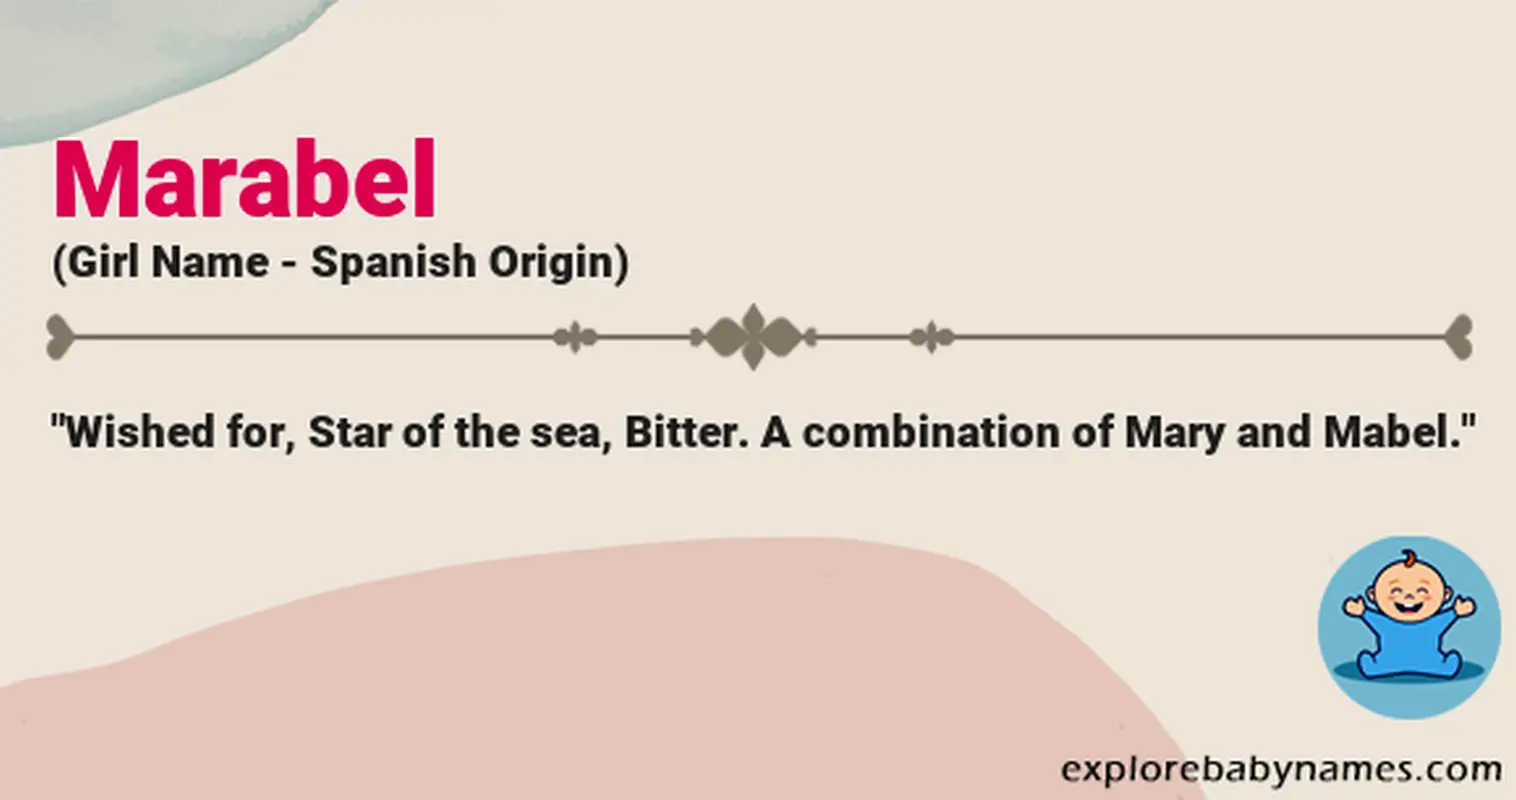 Meaning of Marabel